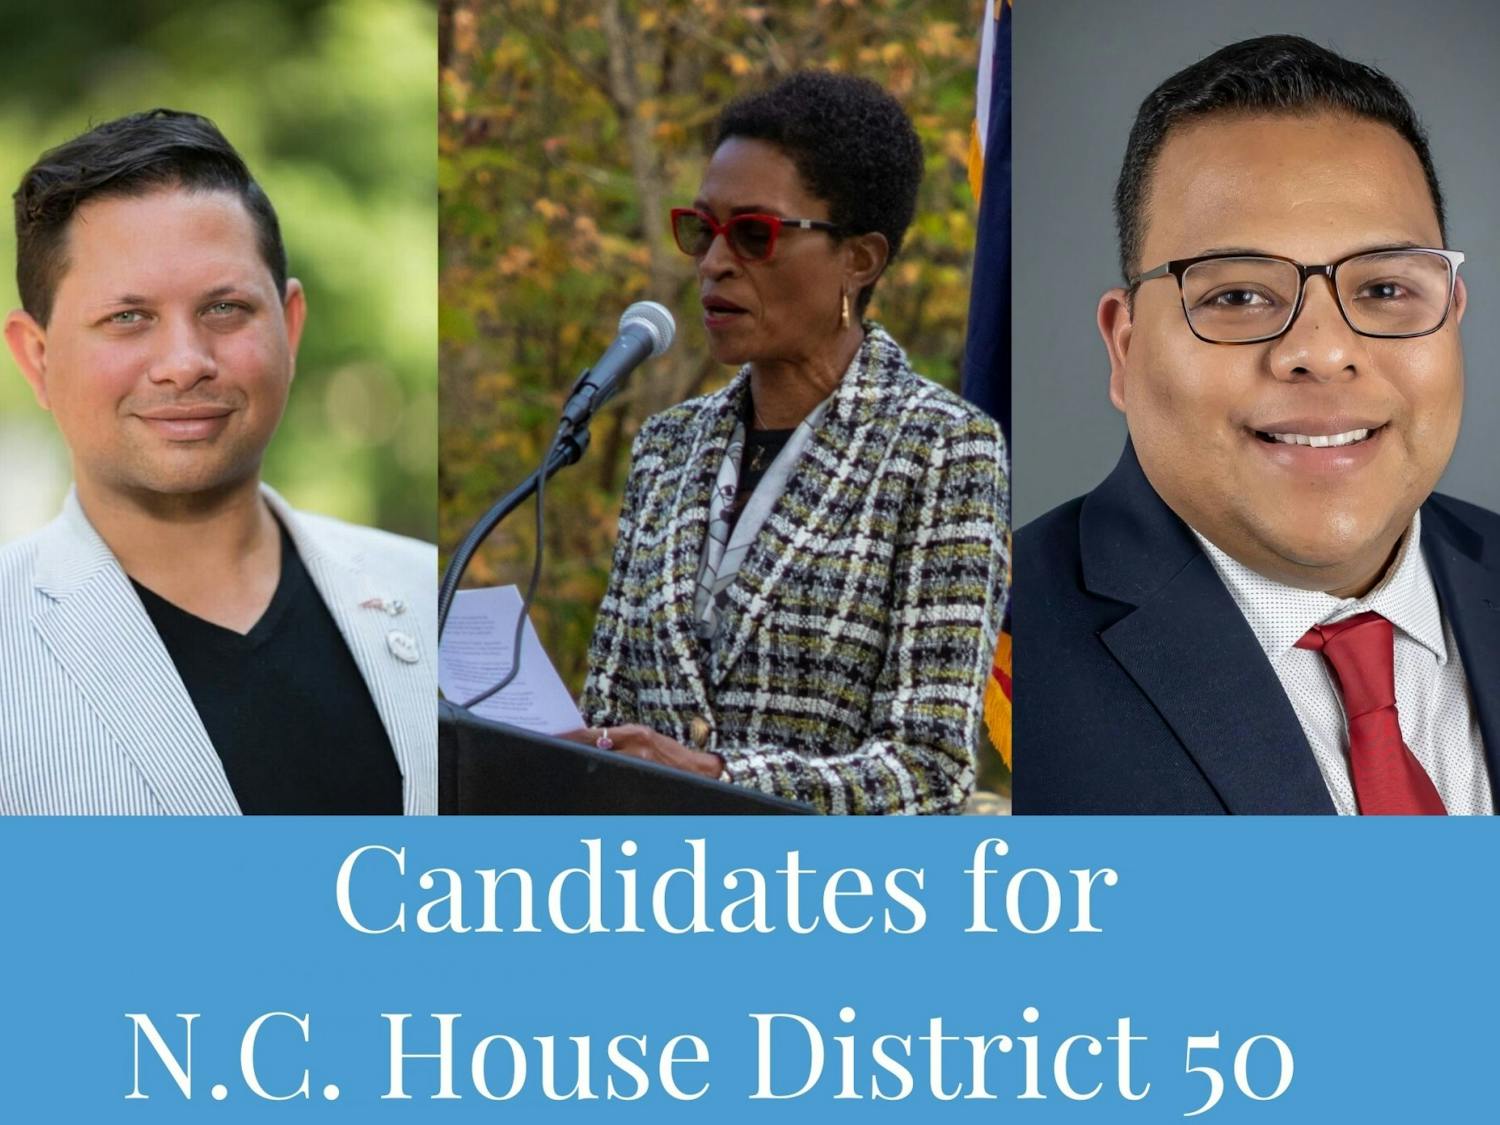 Matt Hughes, Reneé Price and Charles Lopez are candidates for the N.C. House District 50 seat. Photos courtesy of Hughes and Lopez and by DTH/Anna Connors. 